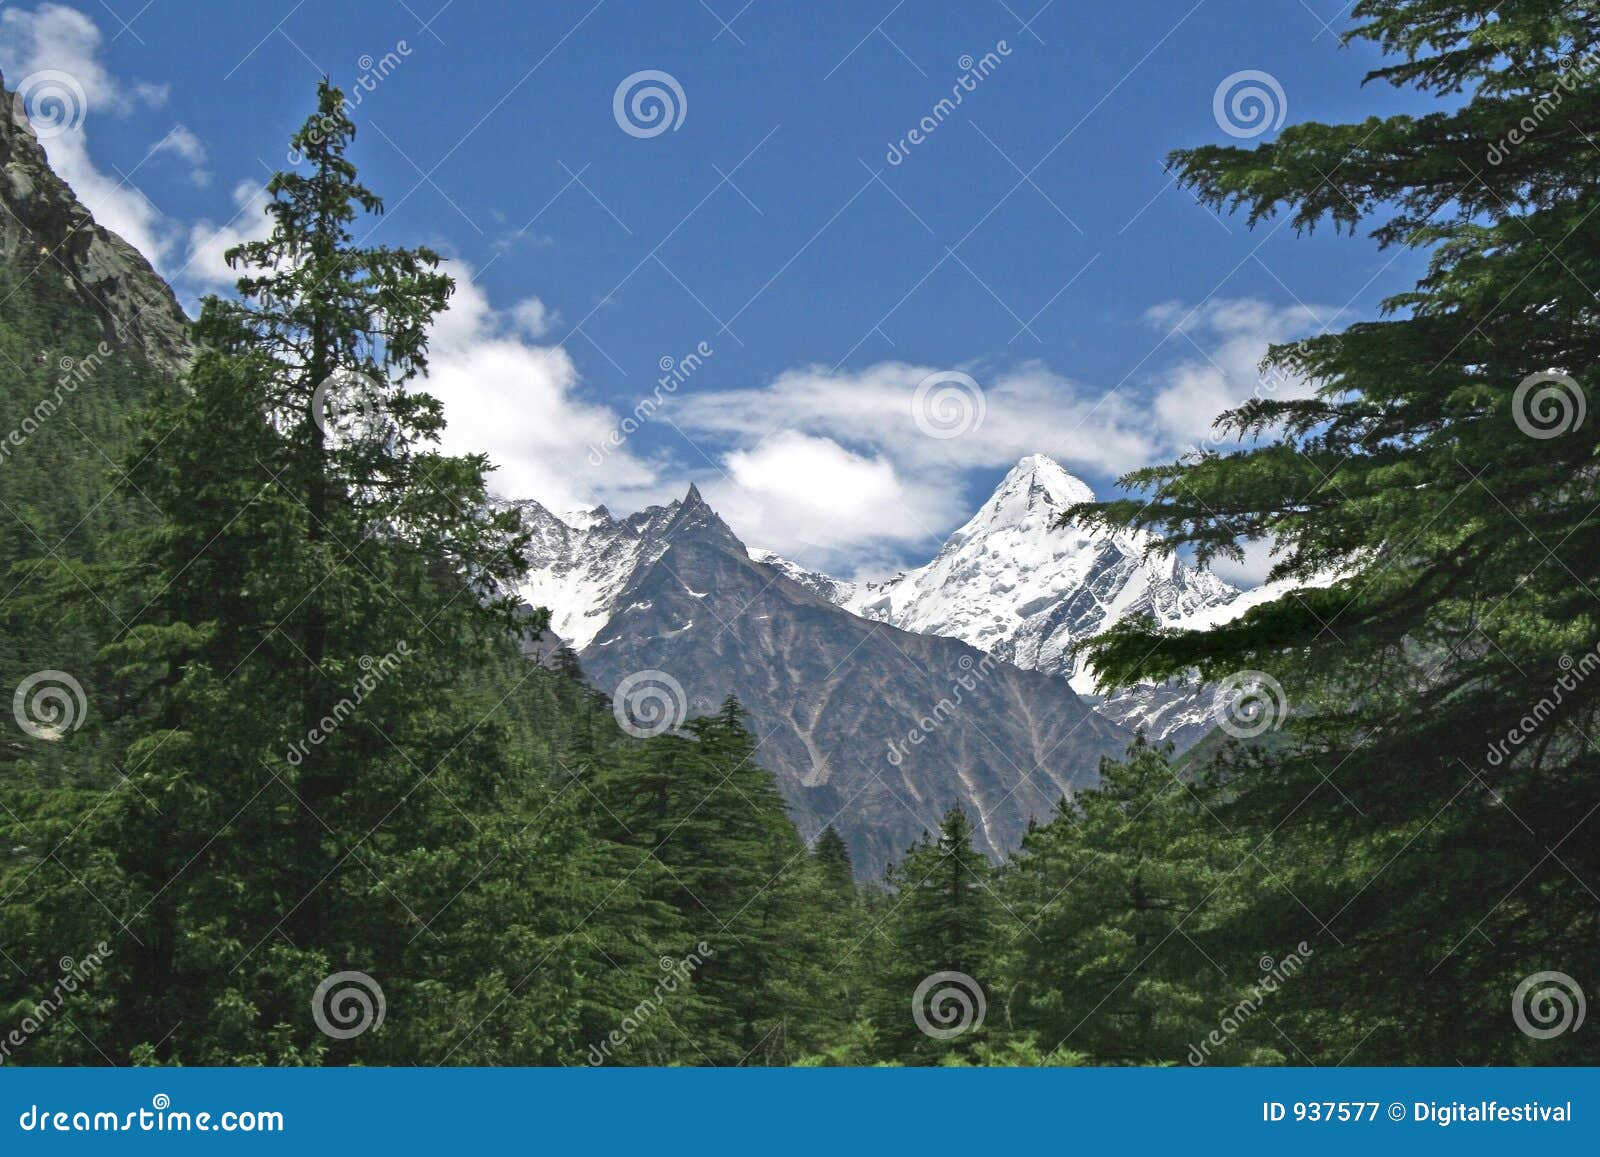 lush green himalayan forest and snow peaked valley india